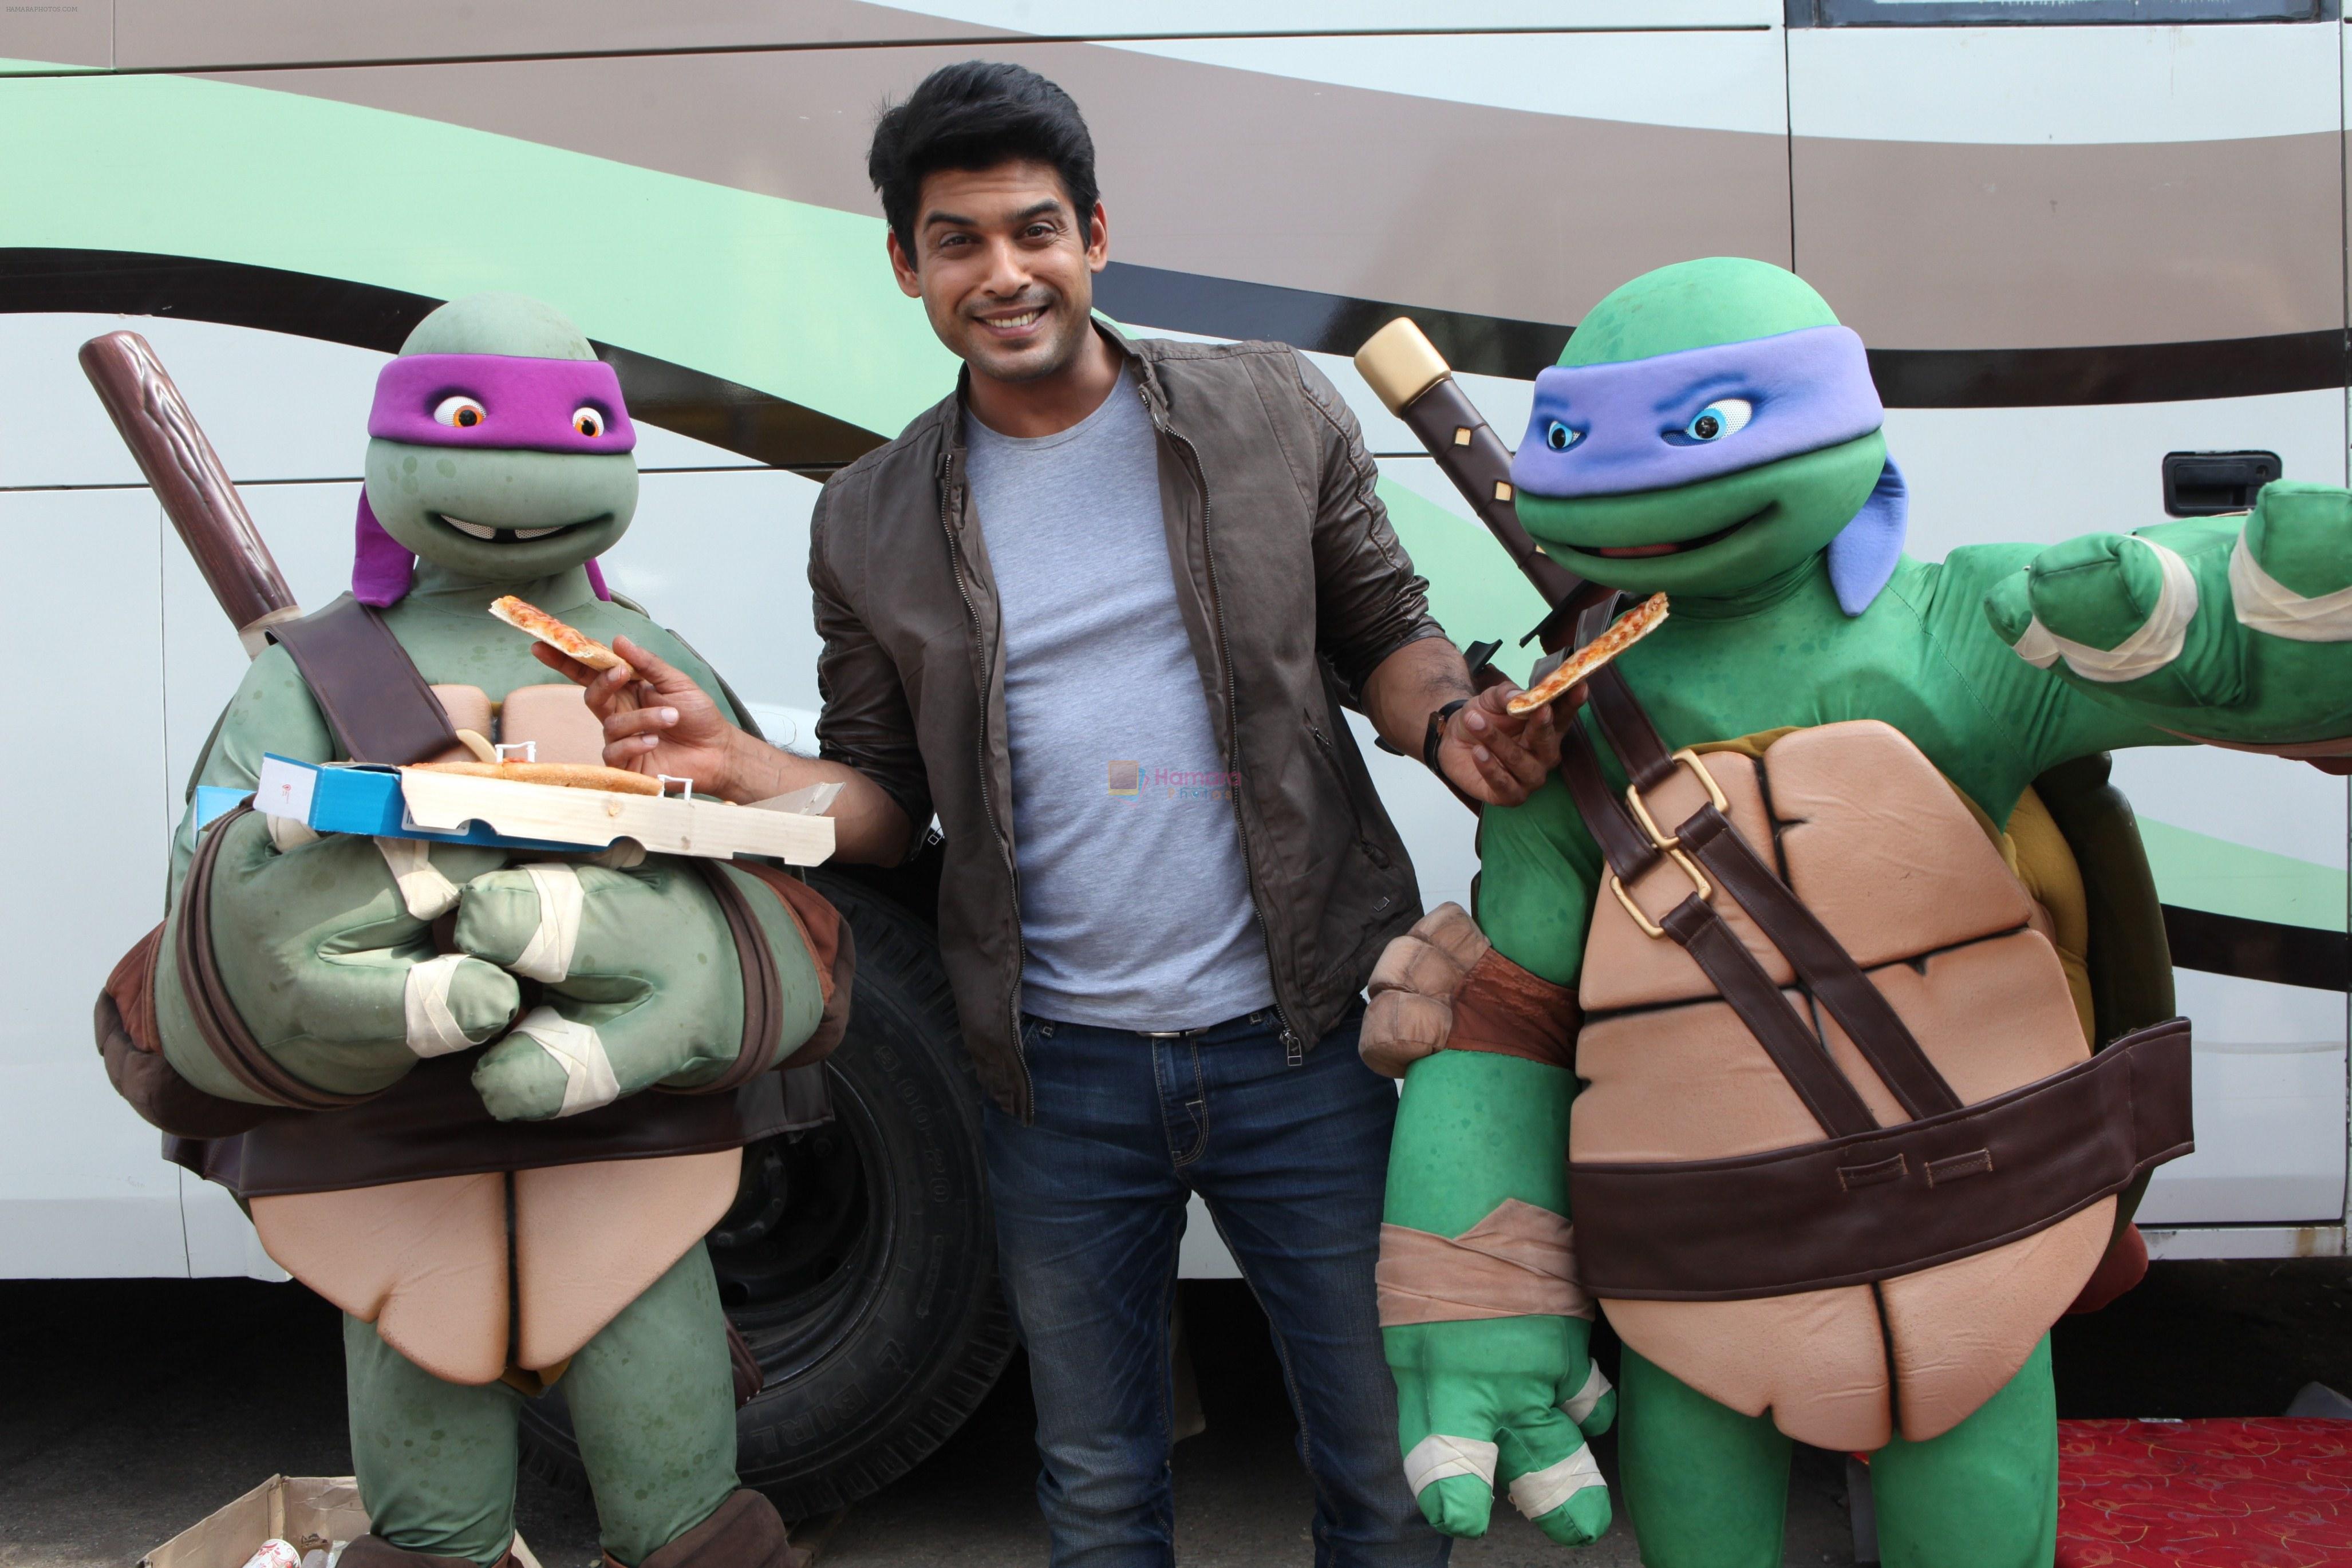 Siddharth Shukla shares a slice of pizza with Donatello and Leonardo on 30th May 2016